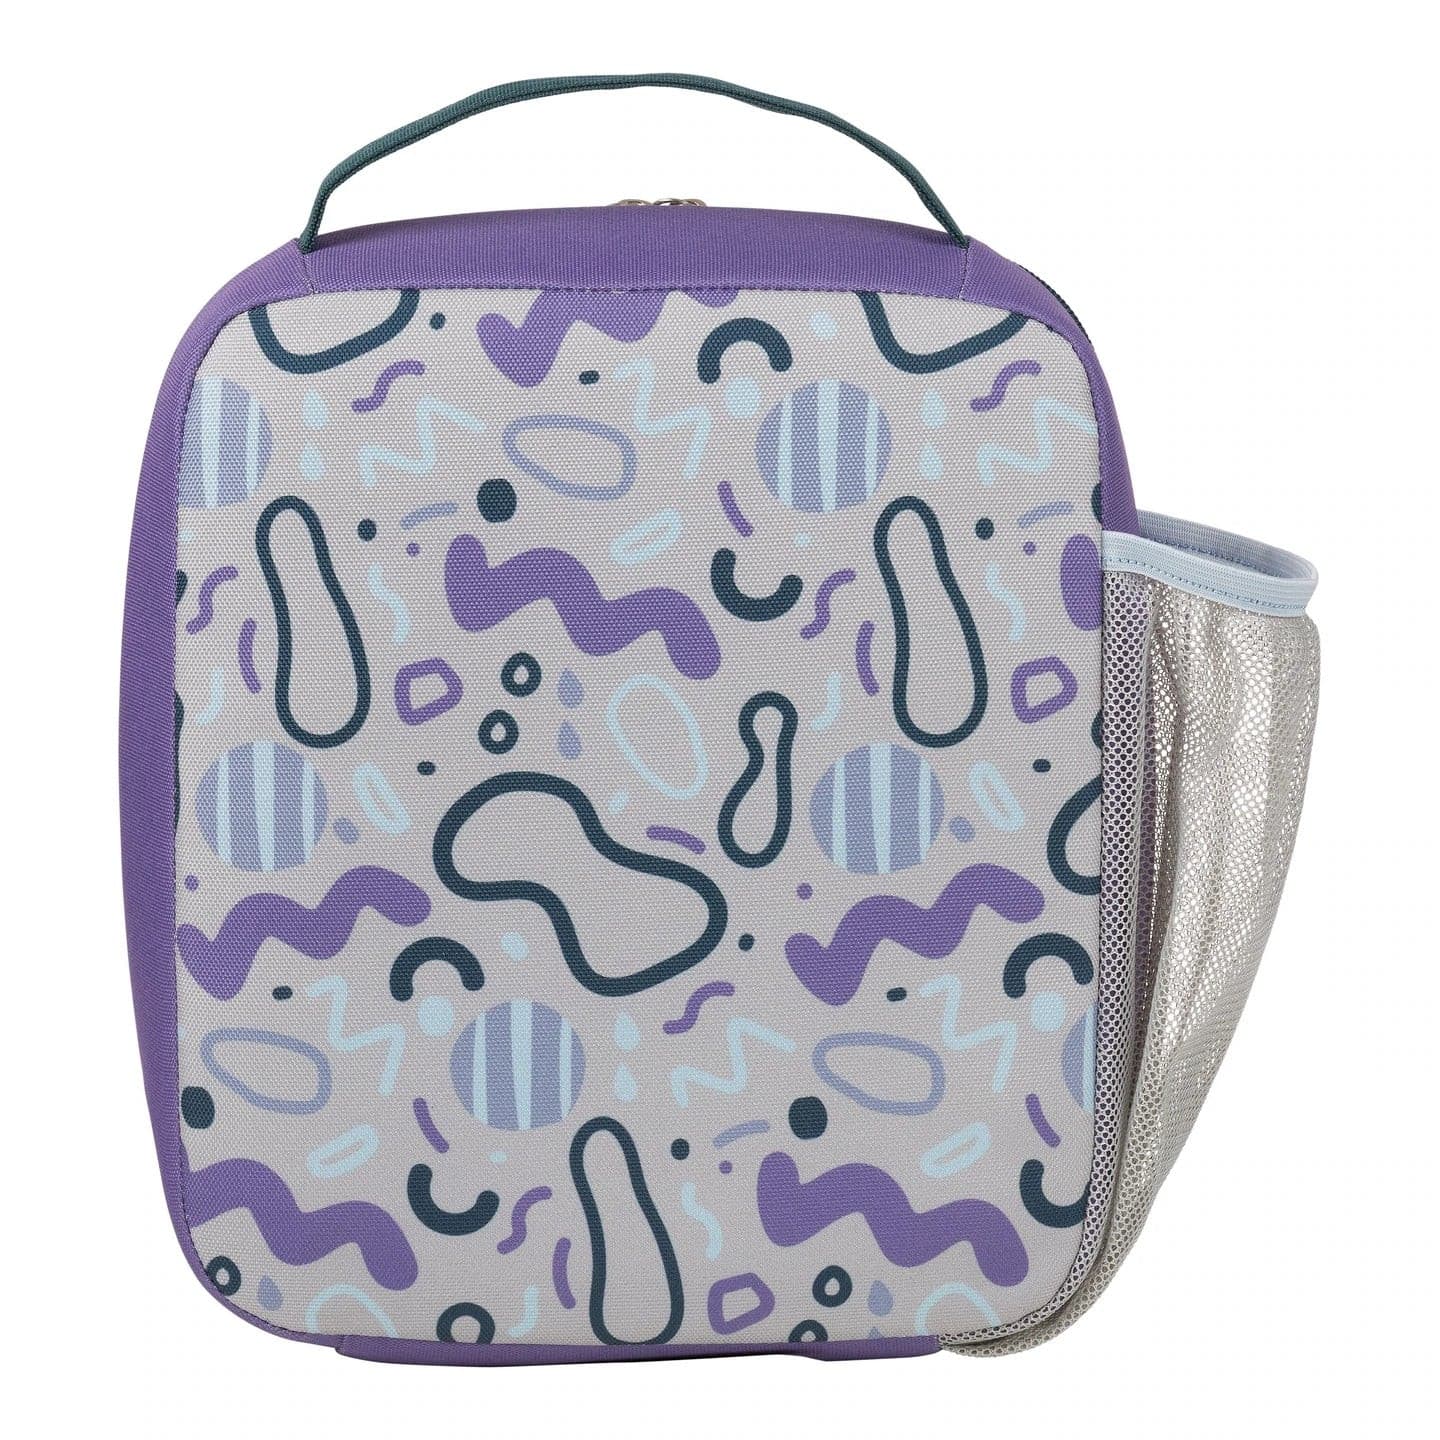 B.BOX Insulated Lunch Bag Oddles of Noodles.